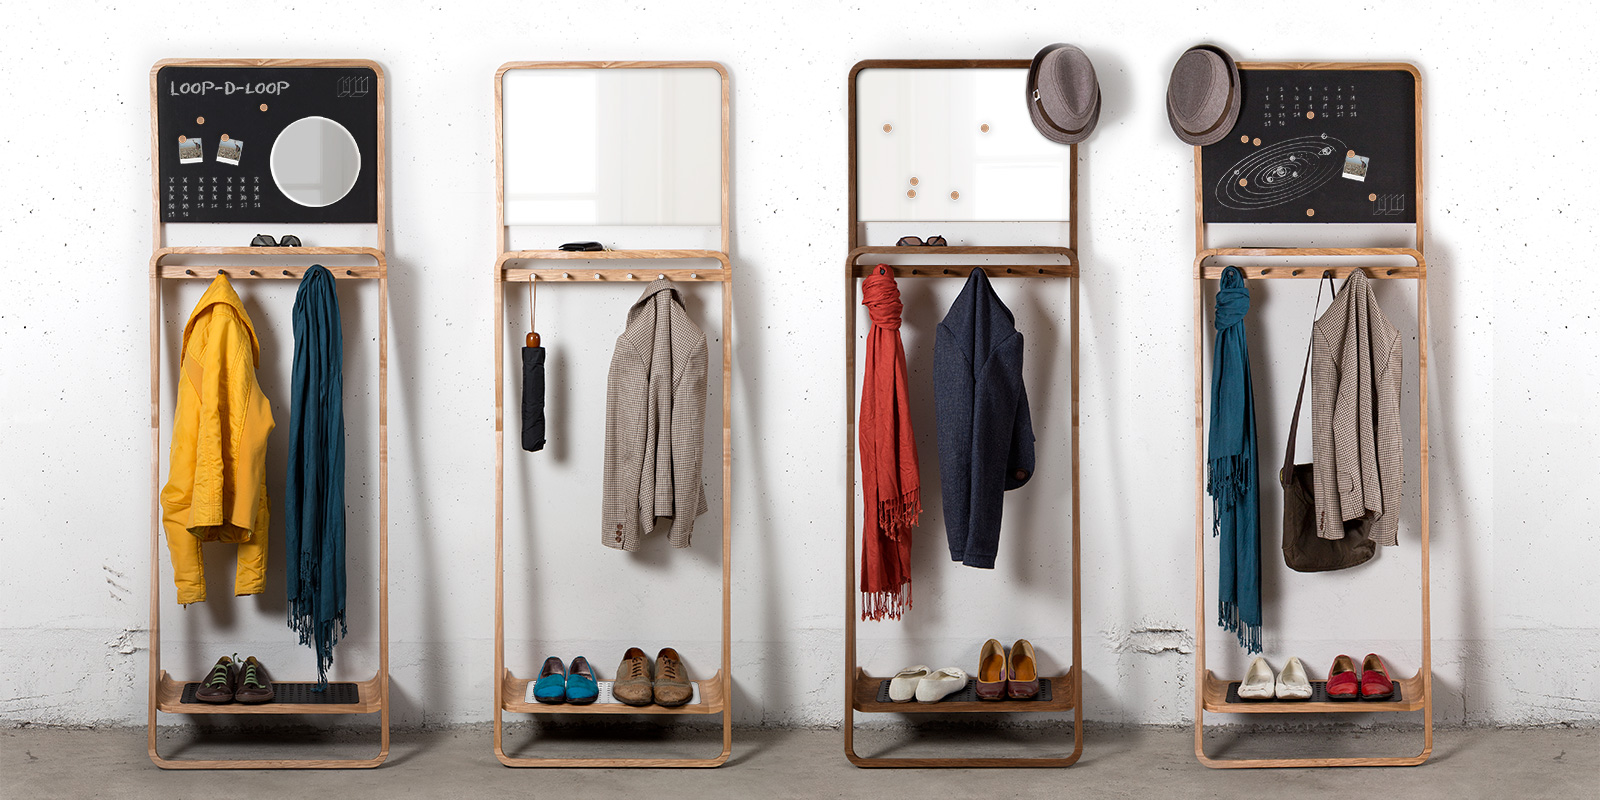 5 Stylish Storage Solutions for the Home || Havenly + MakeSpace